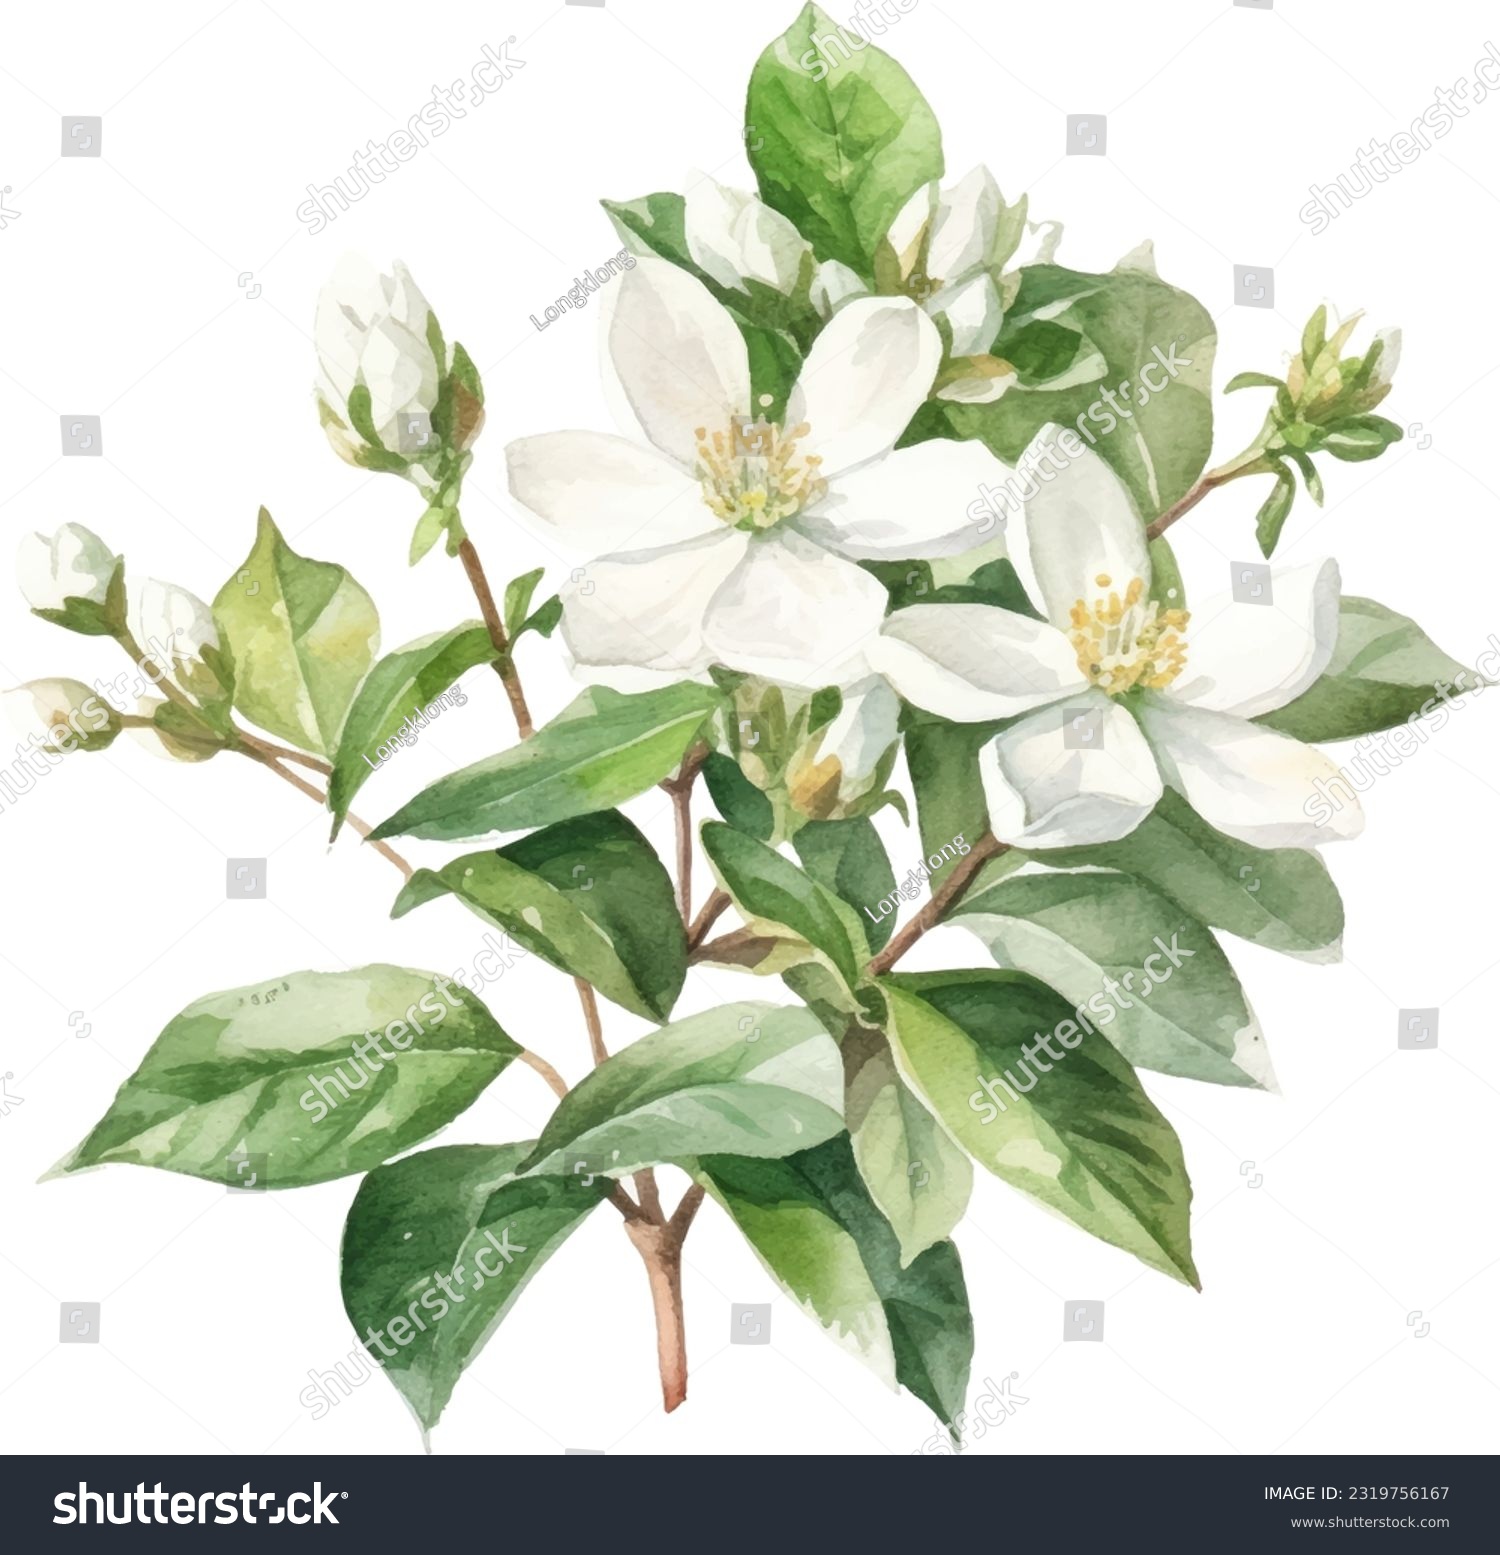 Asiatic Jasmine Watercolor illustration. Hand drawn underwater element design. Artistic vector marine design element. Illustration for greeting cards, printing and other design projects. #2319756167